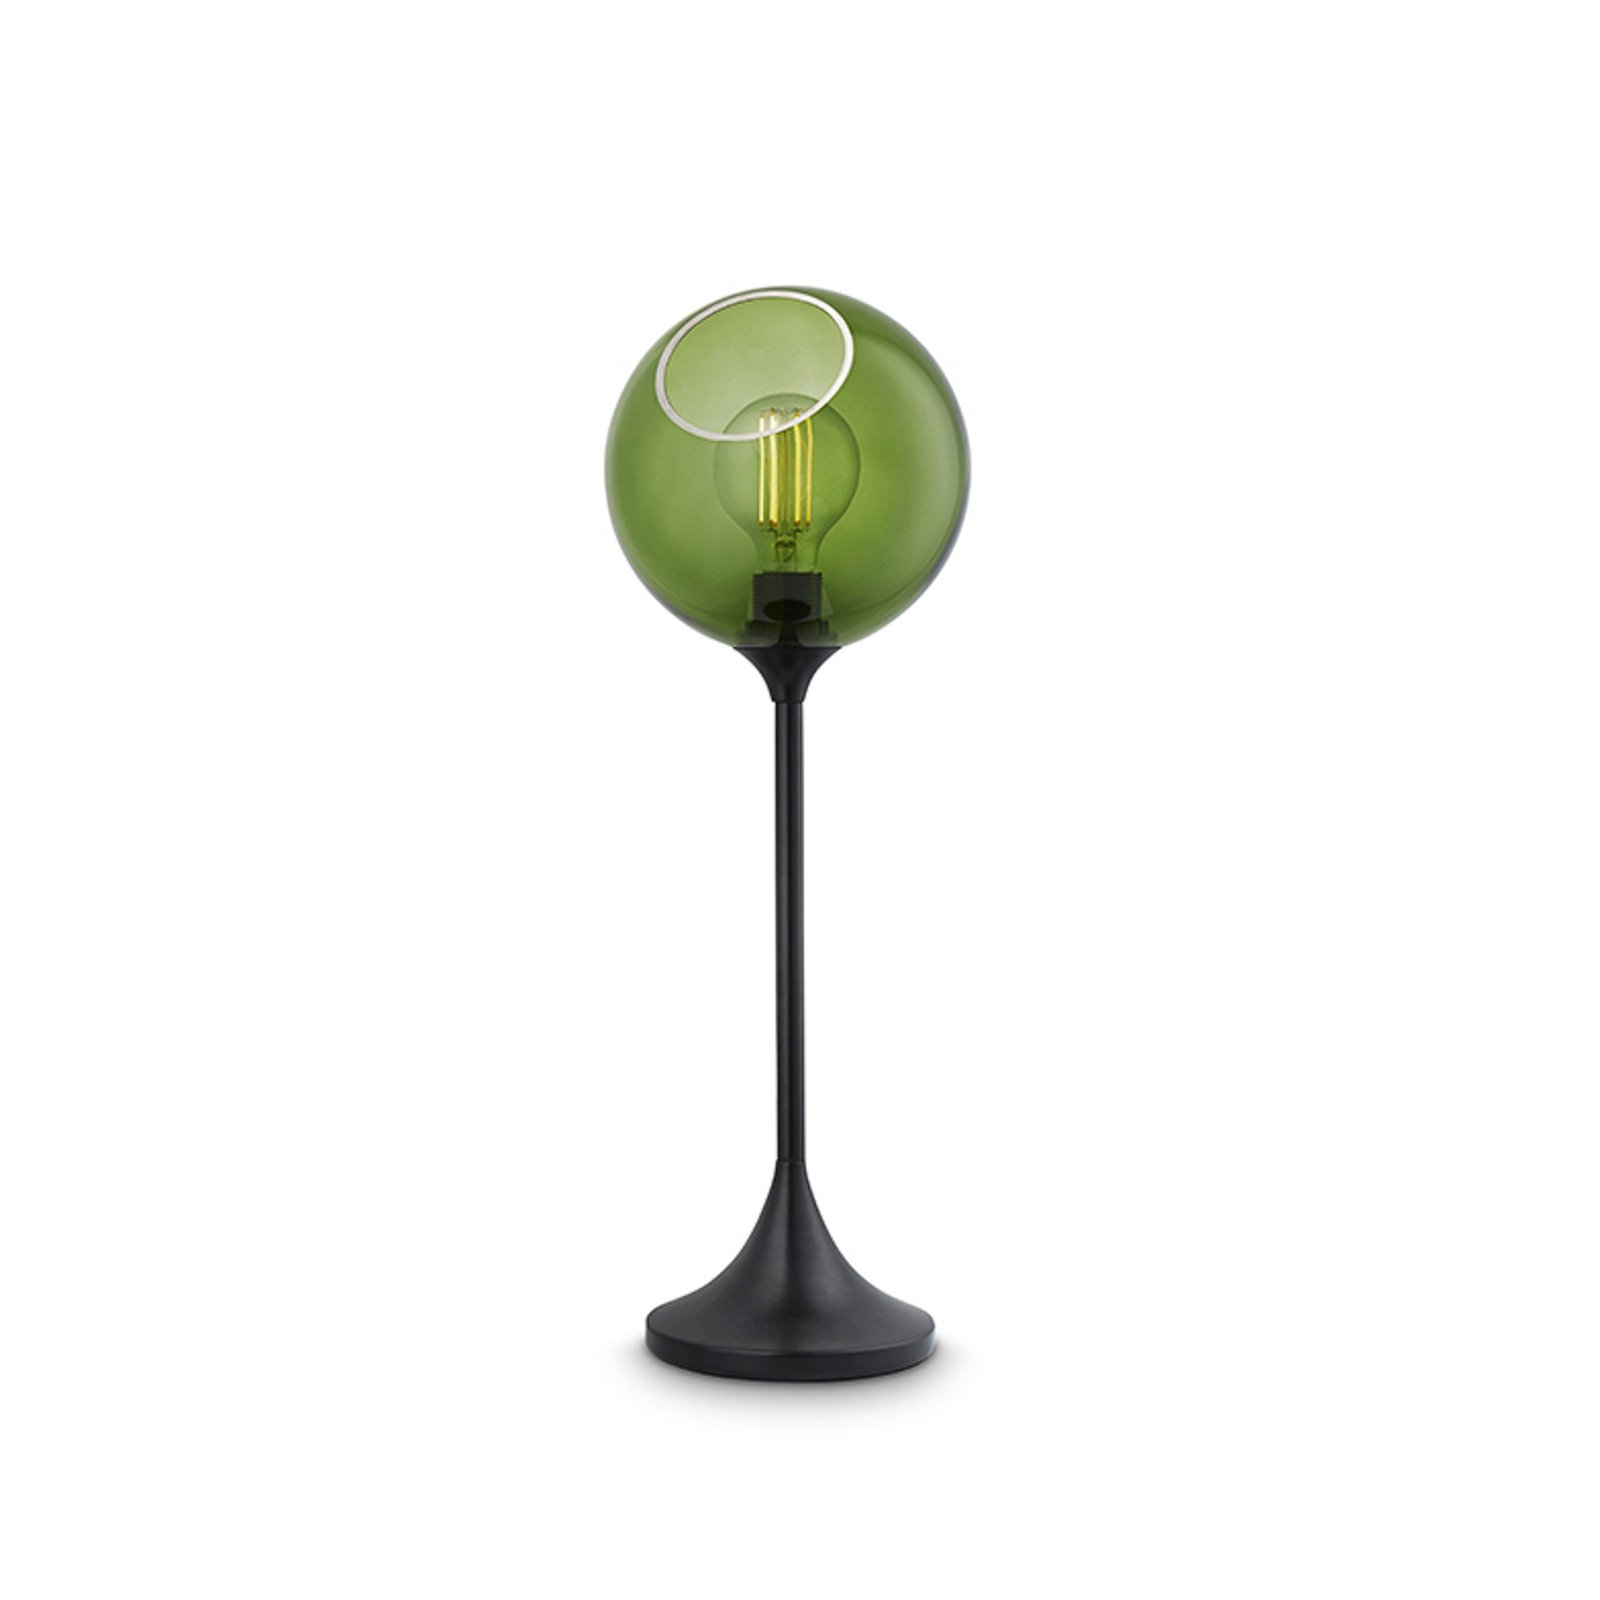 Ballroom table lamp, green, glass, hand-blown, dimmable